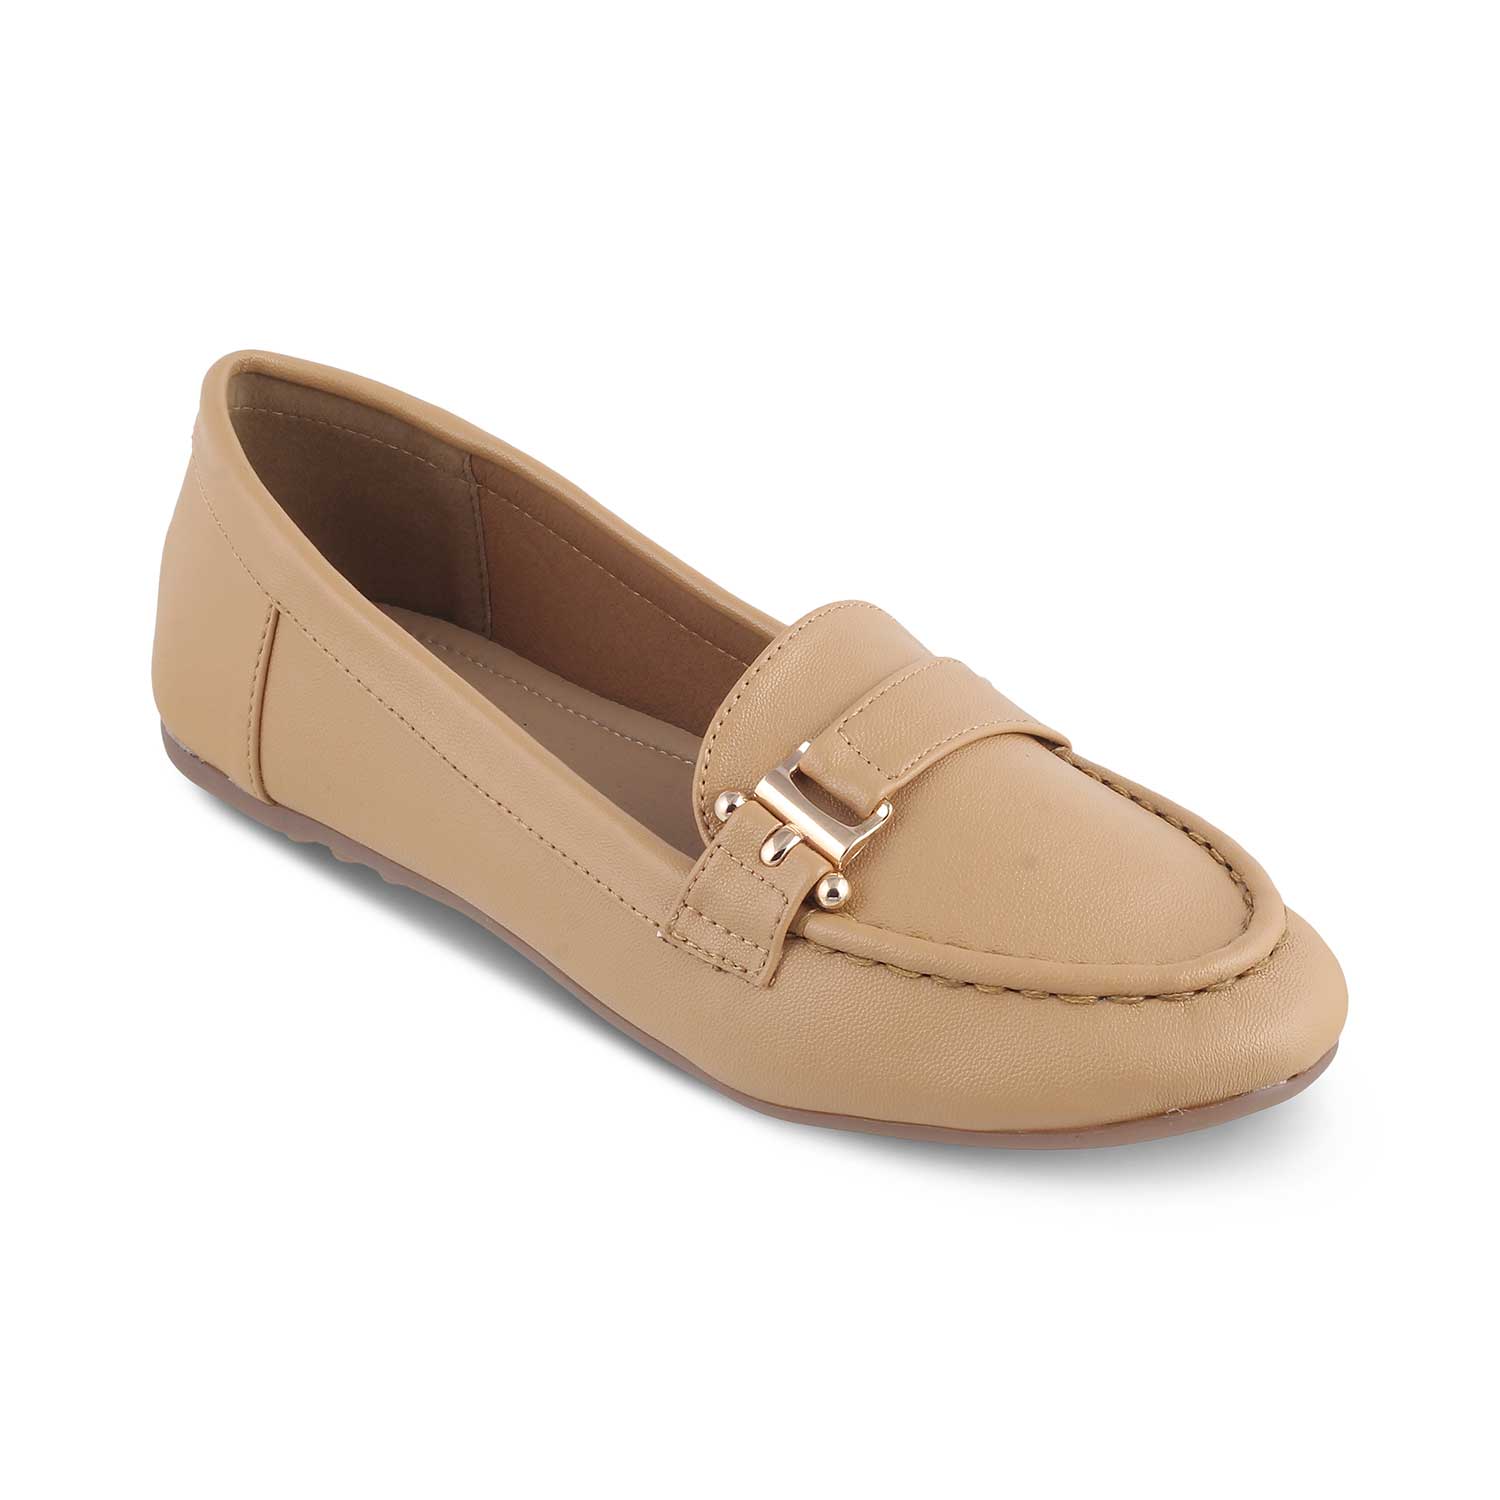 The Lativa Beige Women's Dress Loafers Tresmode